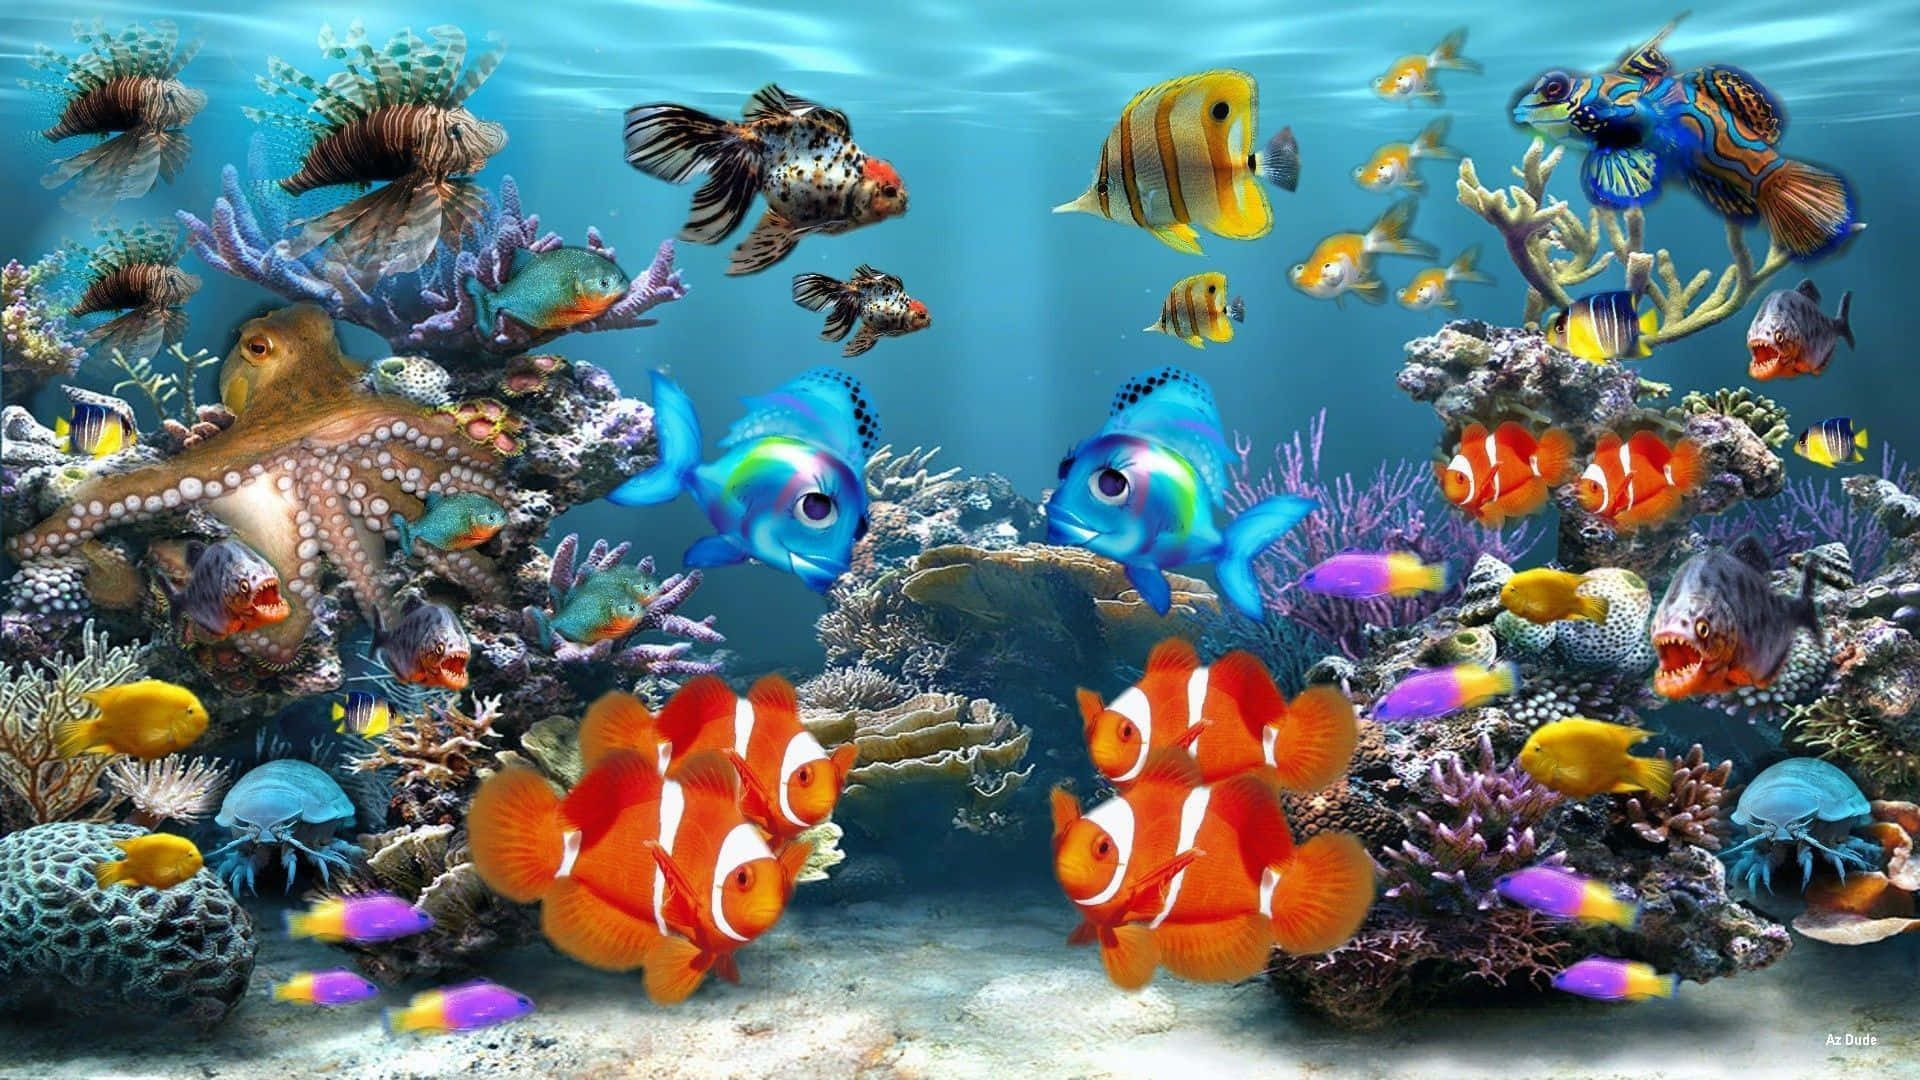 A Colorful Underwater Scene With Many Fish Background